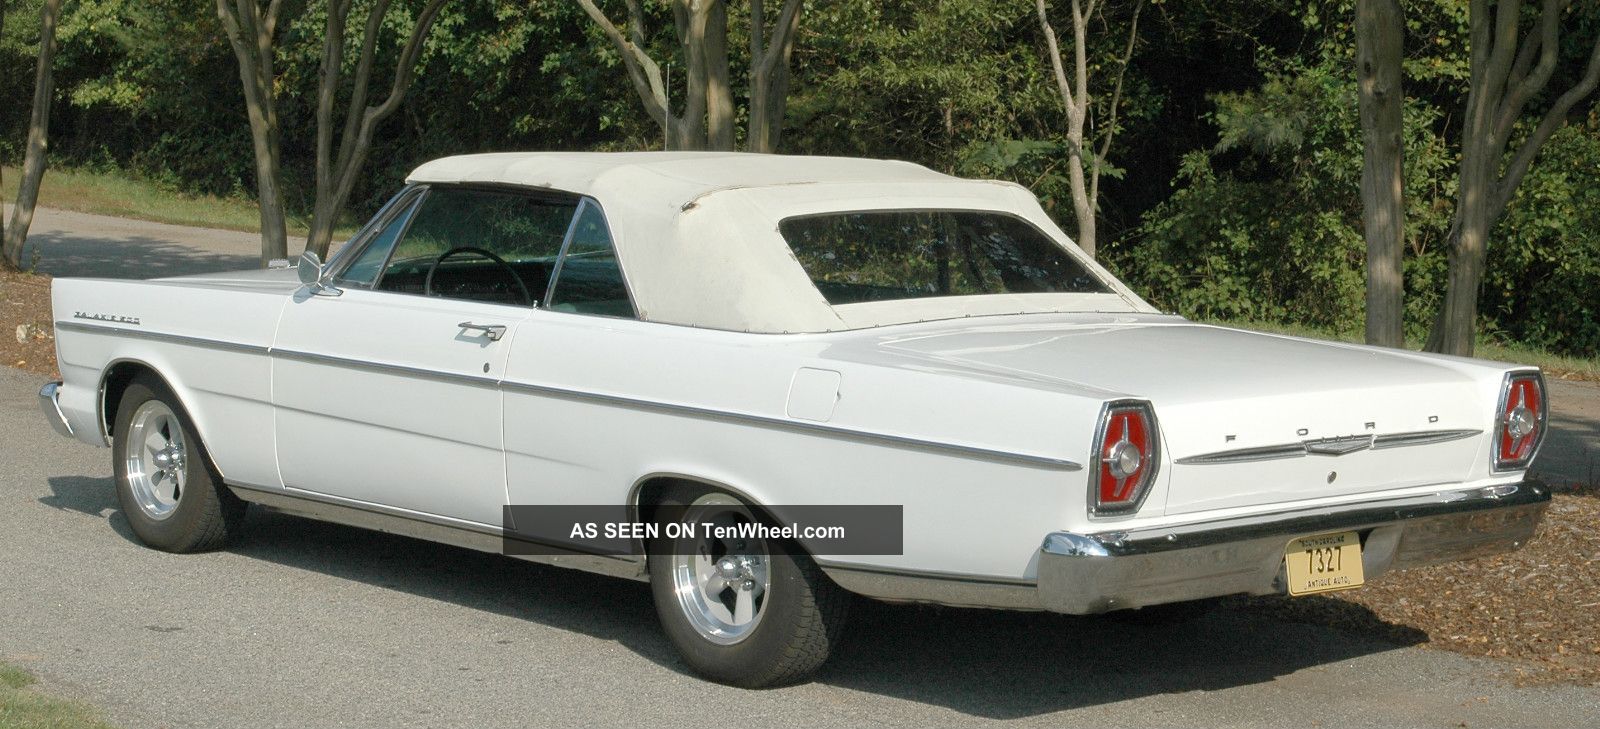 1965 Ford galaxie owners manual